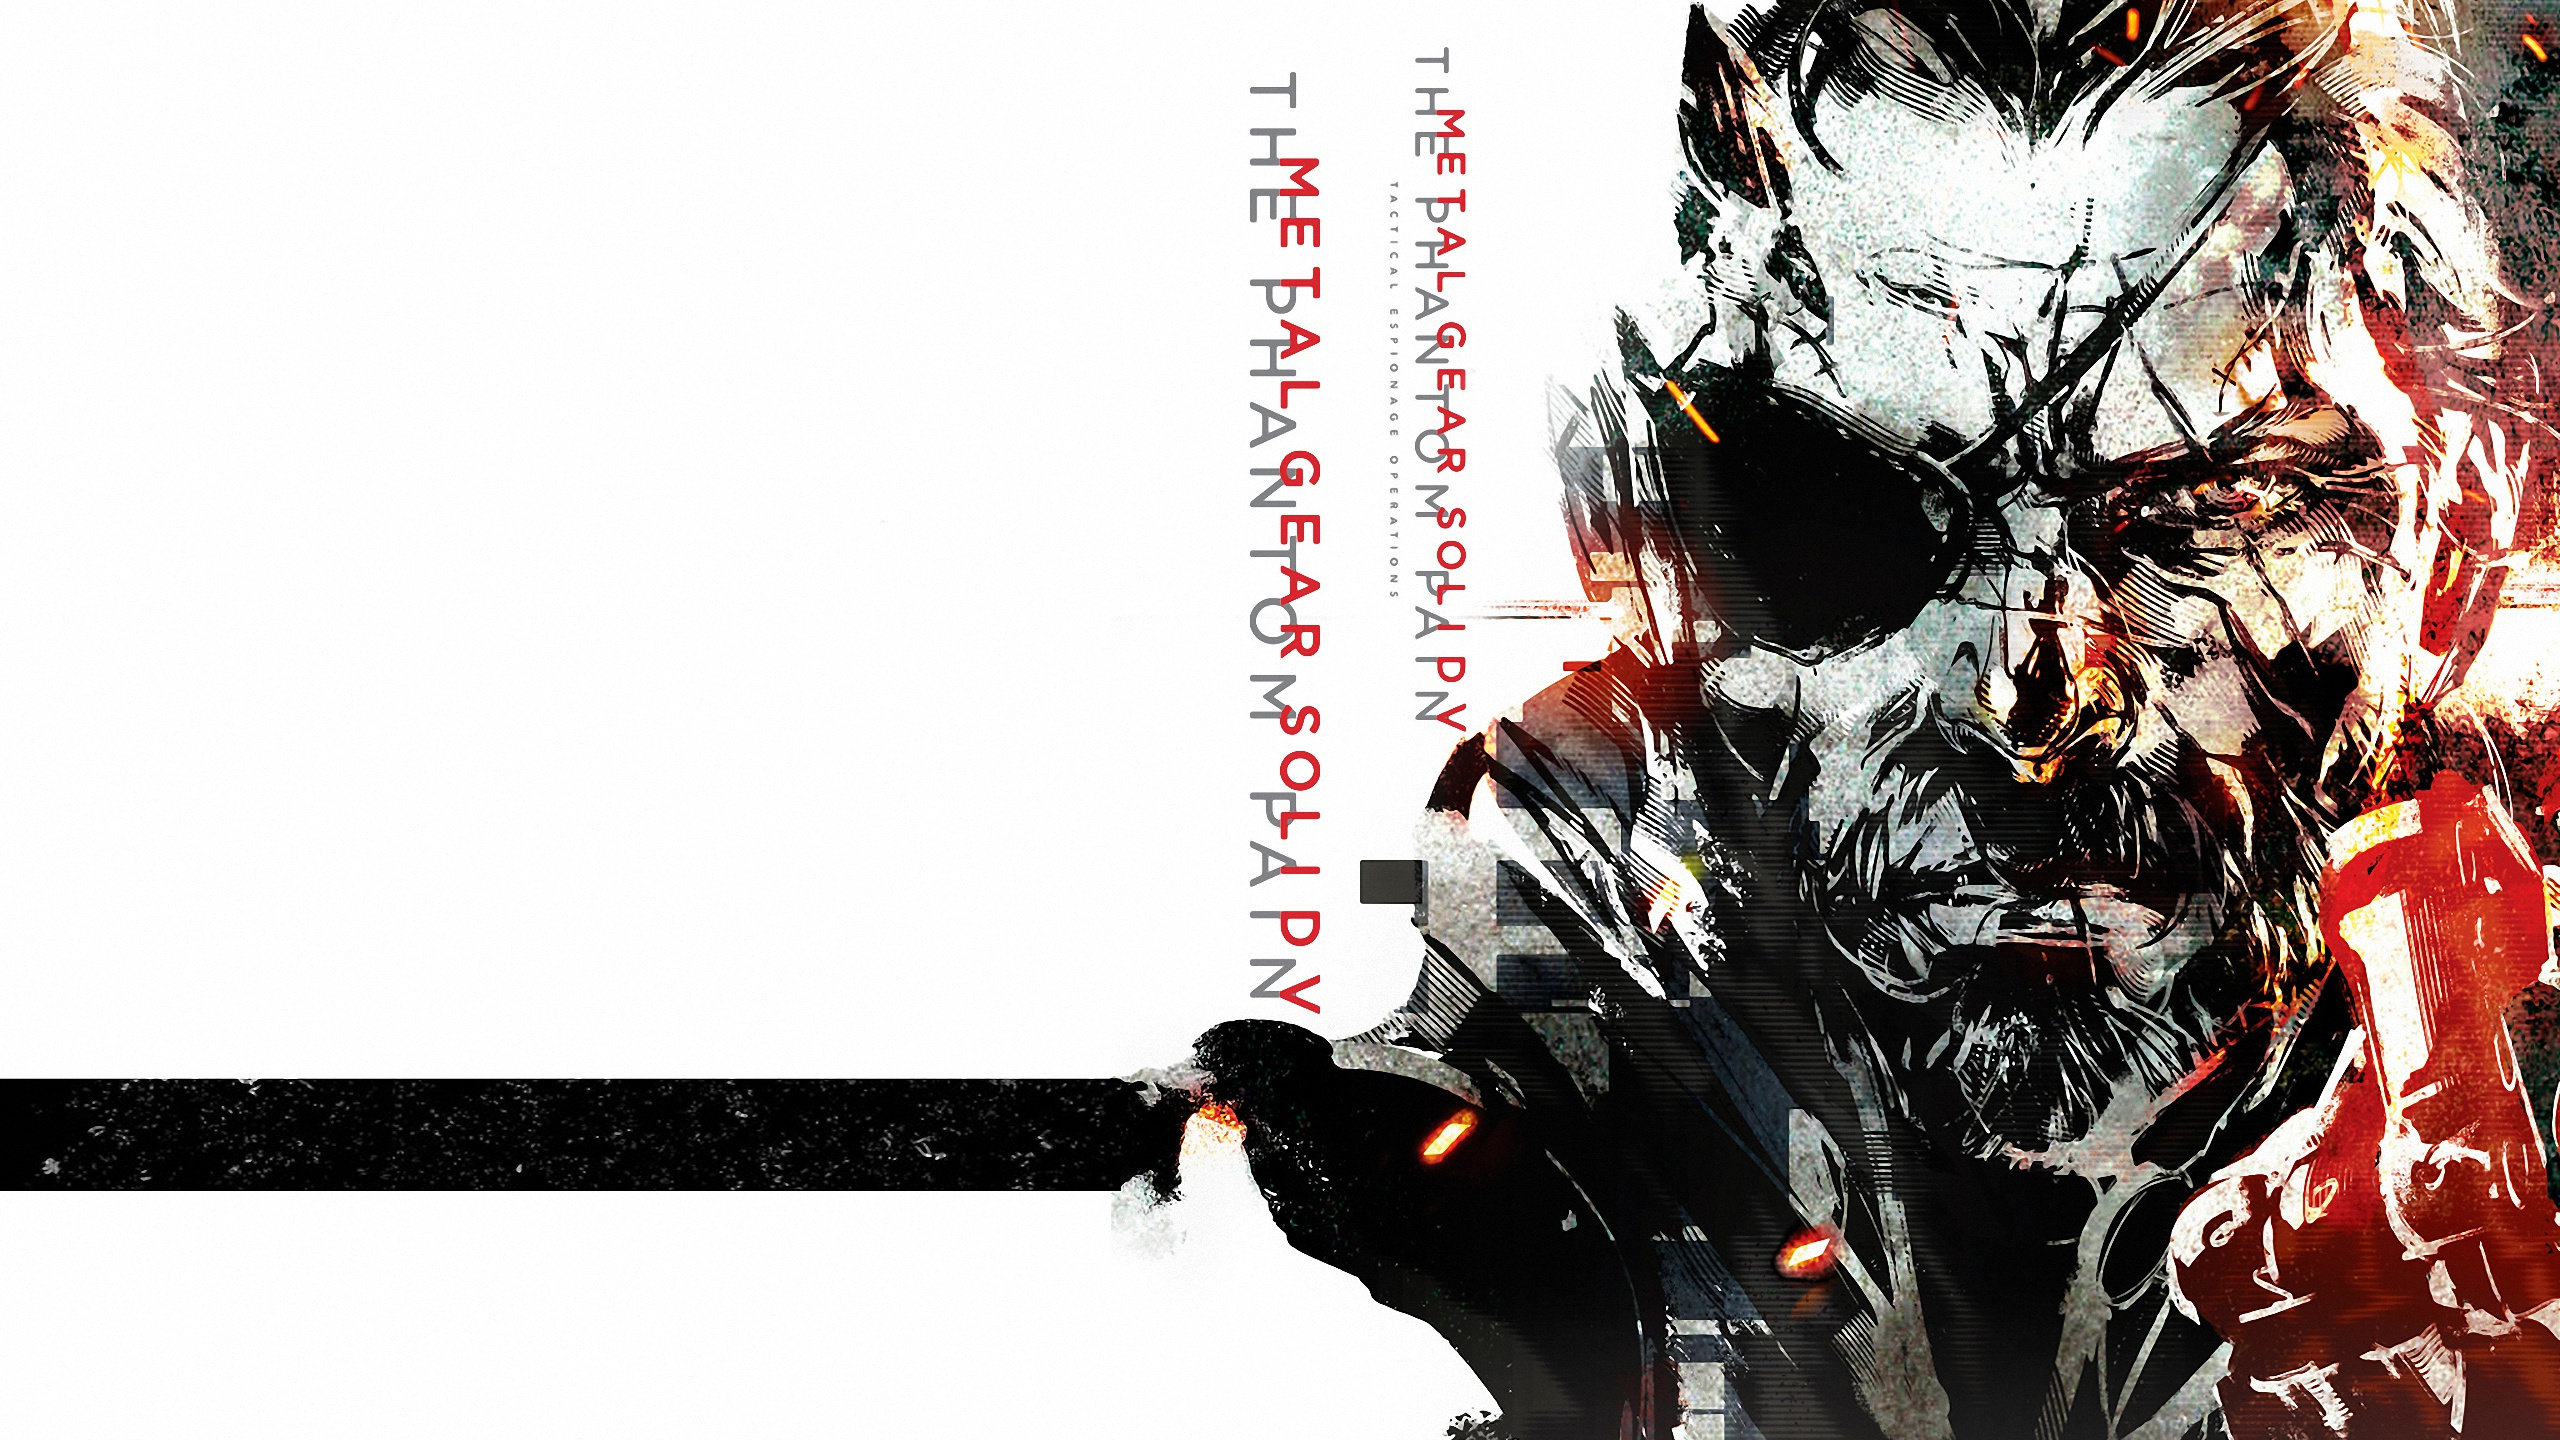 Awesome Metal Gear Solid 5 (V): The Phantom Pain (MGSV 5) free background ID:460447 for hd 2560x1440 PC